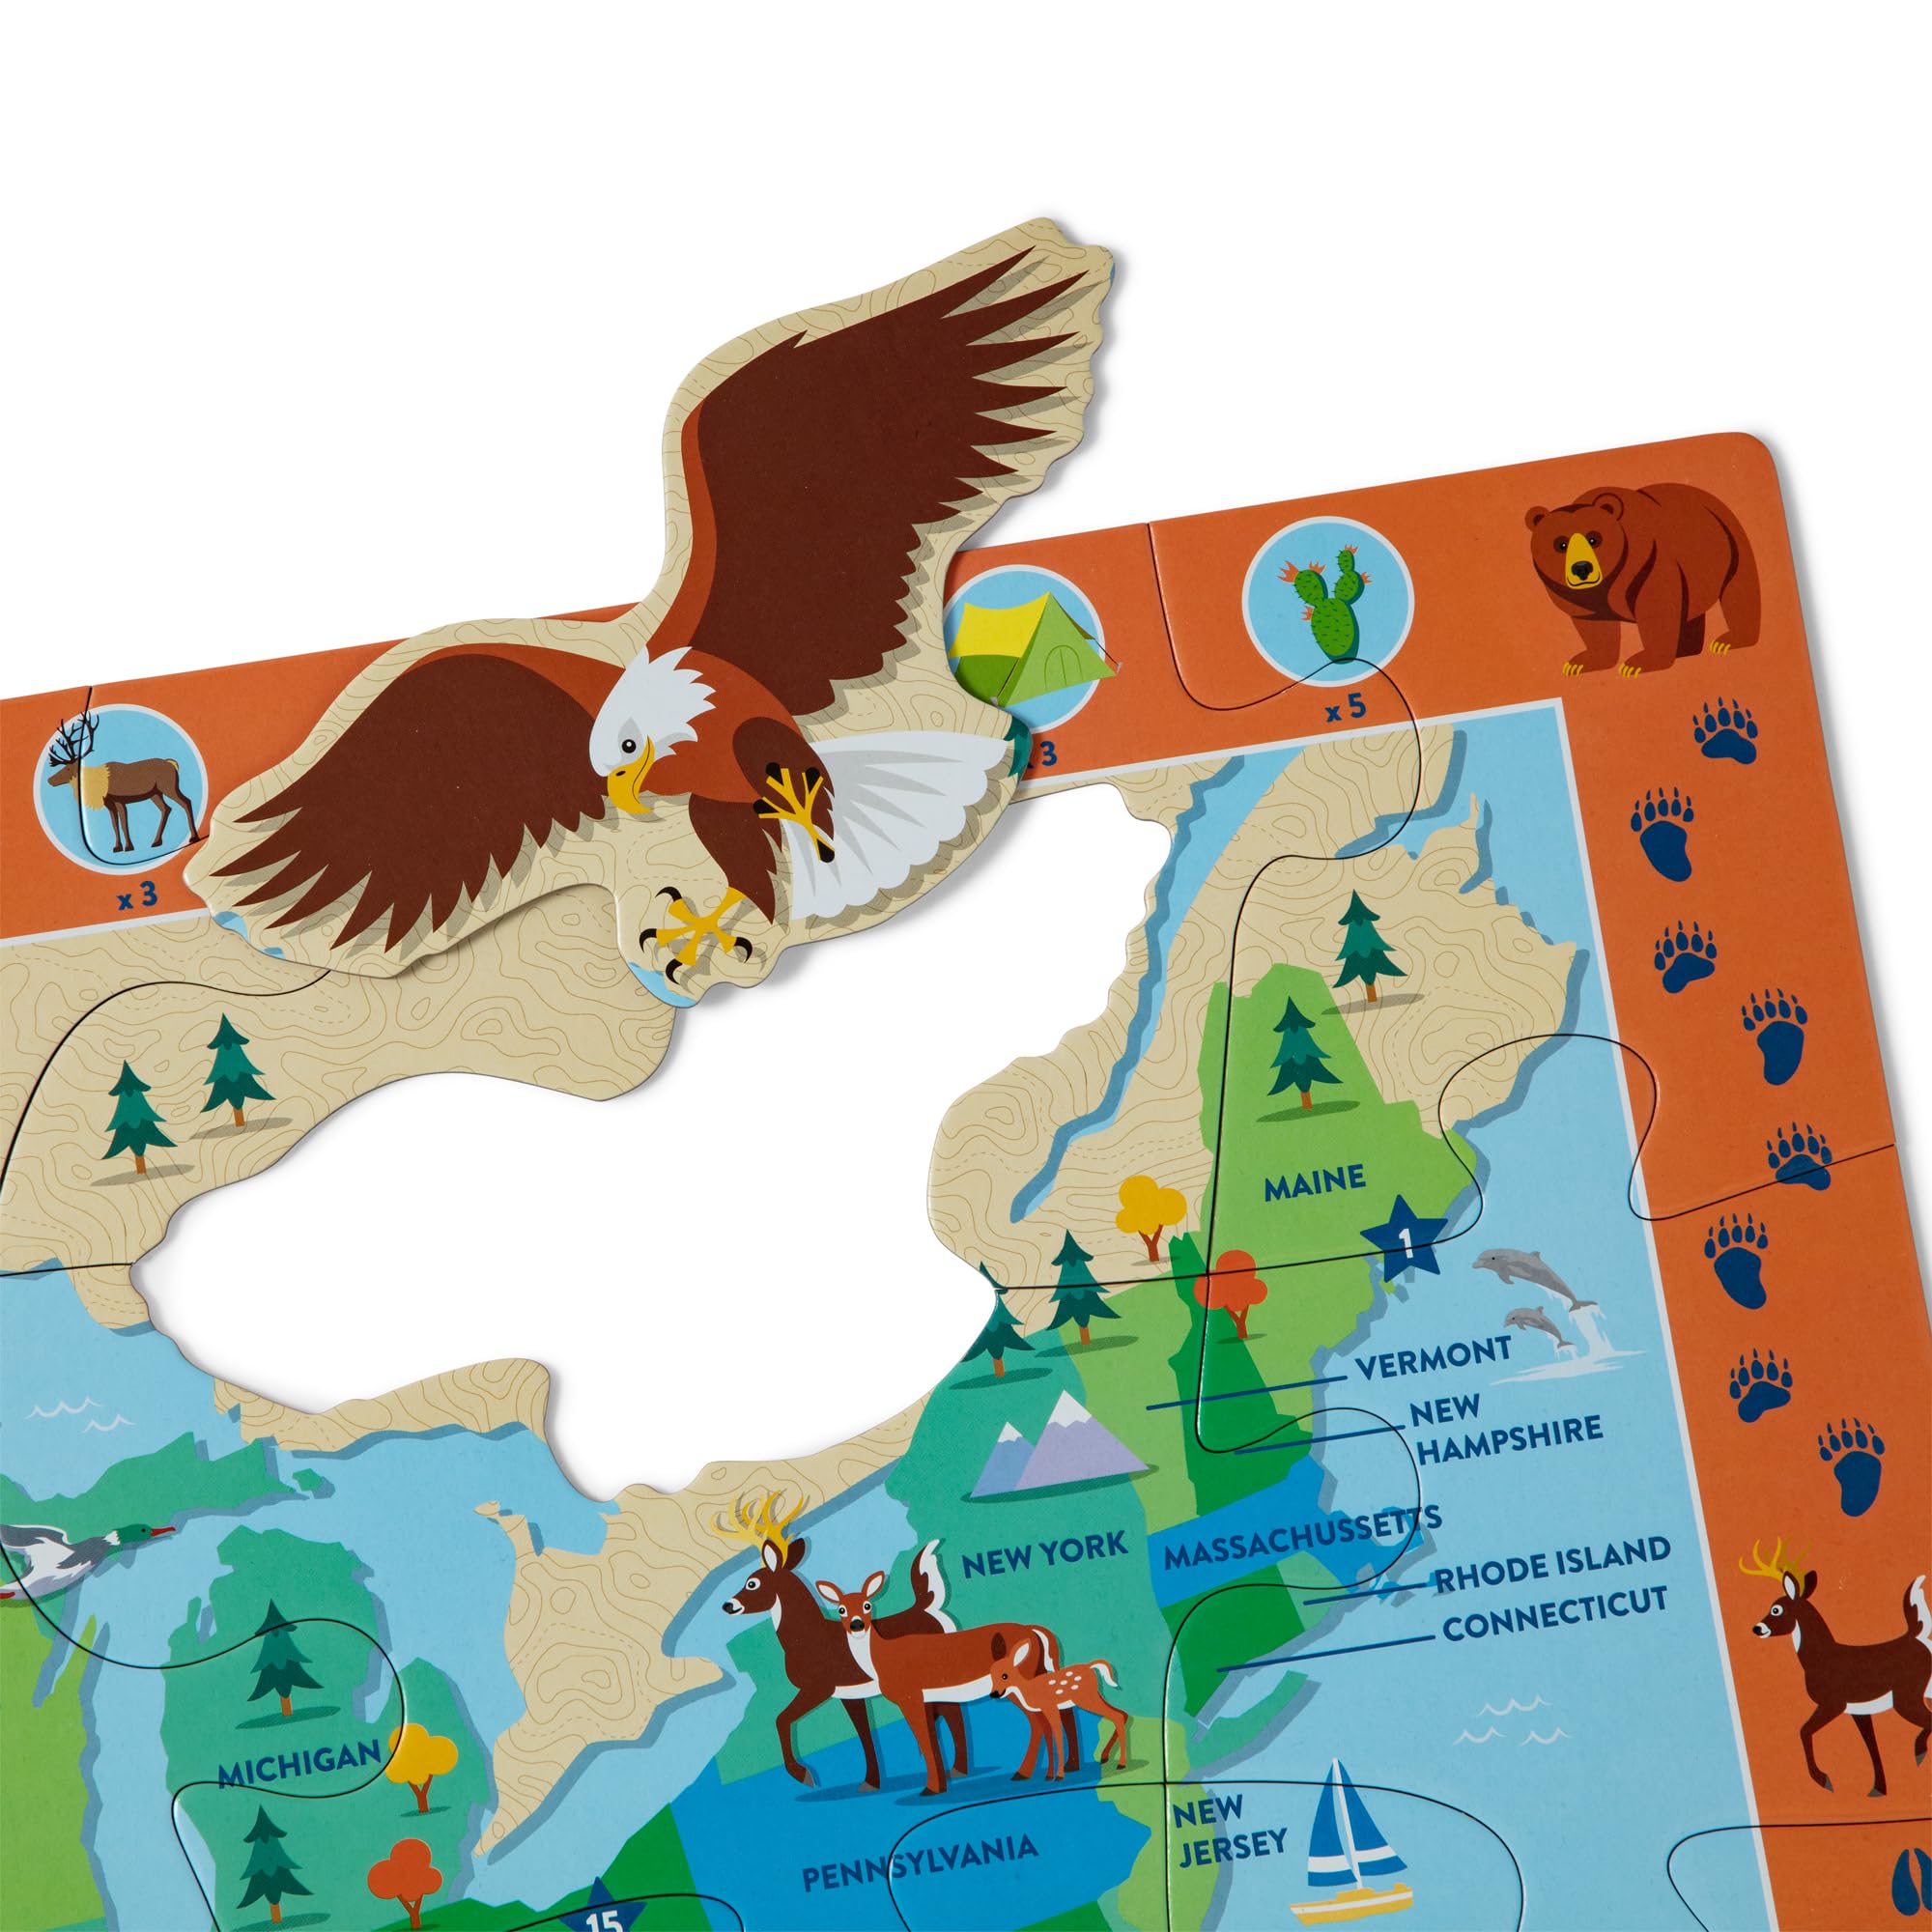 Melissa & Doug National Parks U.S.A. Map Floor Puzzle – 45 Jumbo and Animal Shaped Pieces, Search-and-Find Activities - Kids Preschool Educational Toy for Girls and for Boys Ages 3+